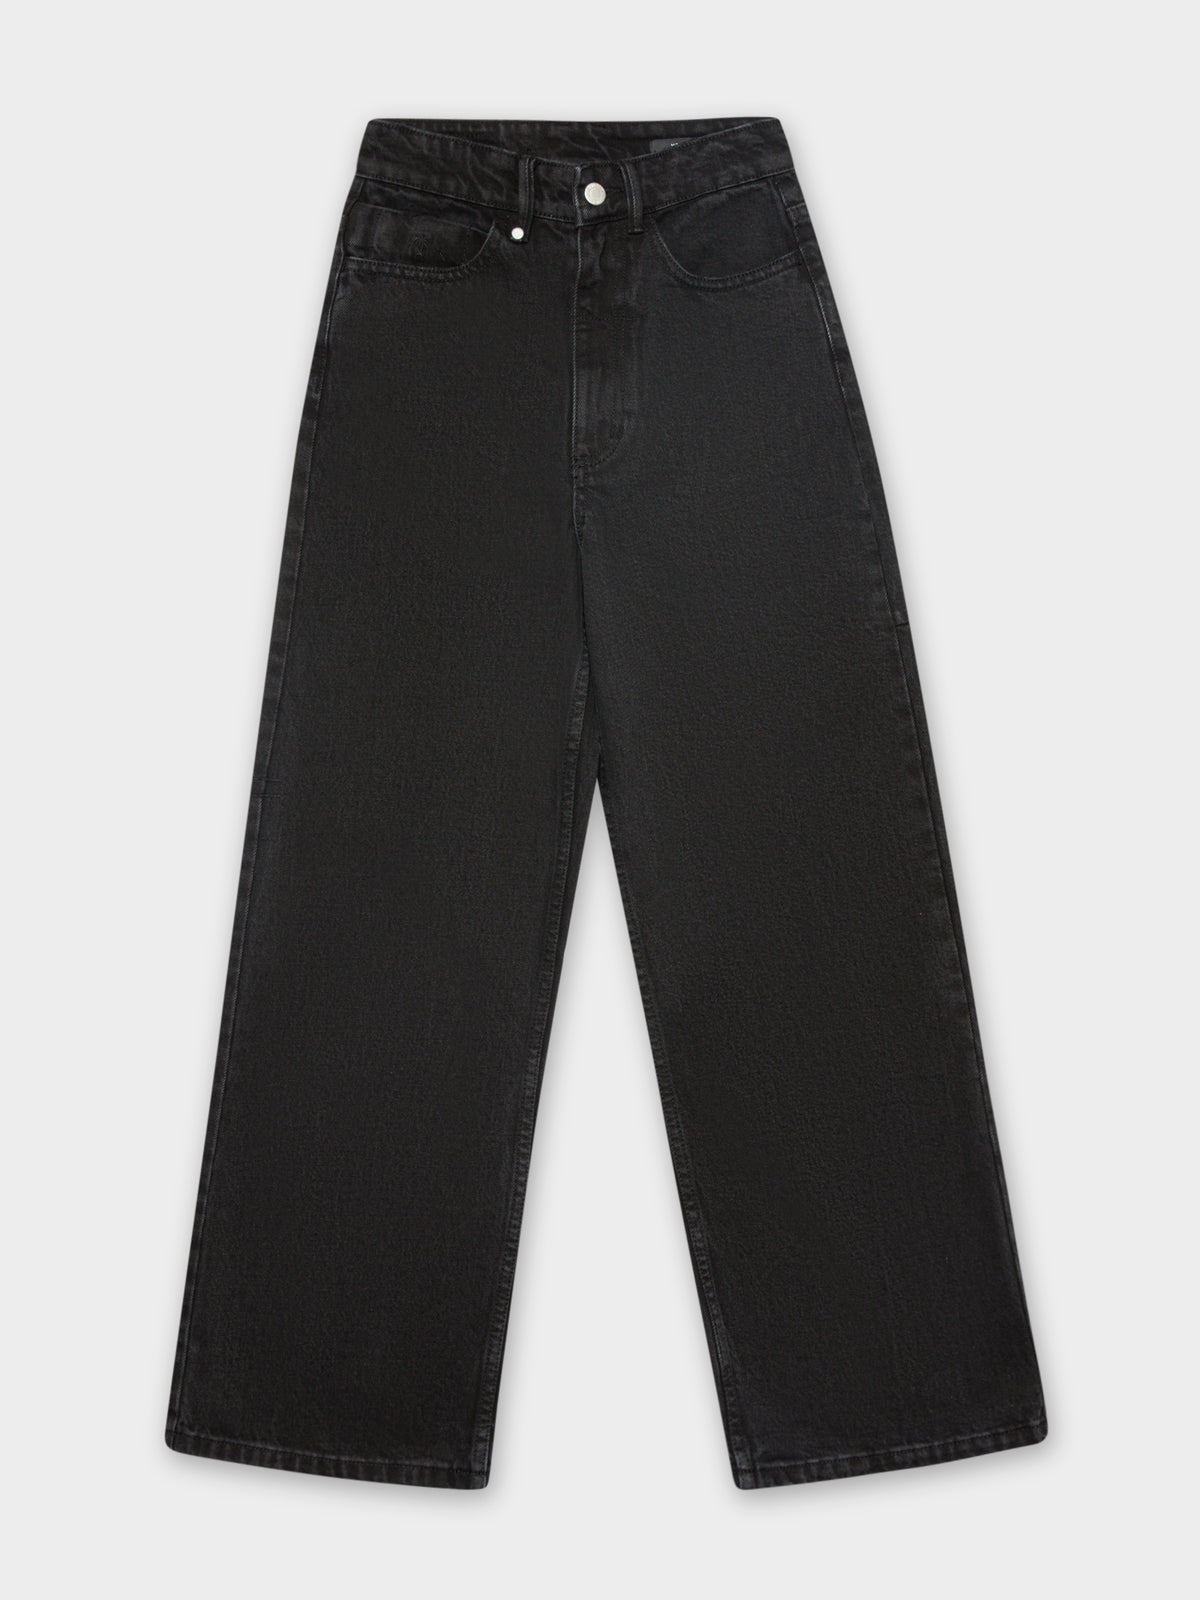 Holly Jeans in Aged Black